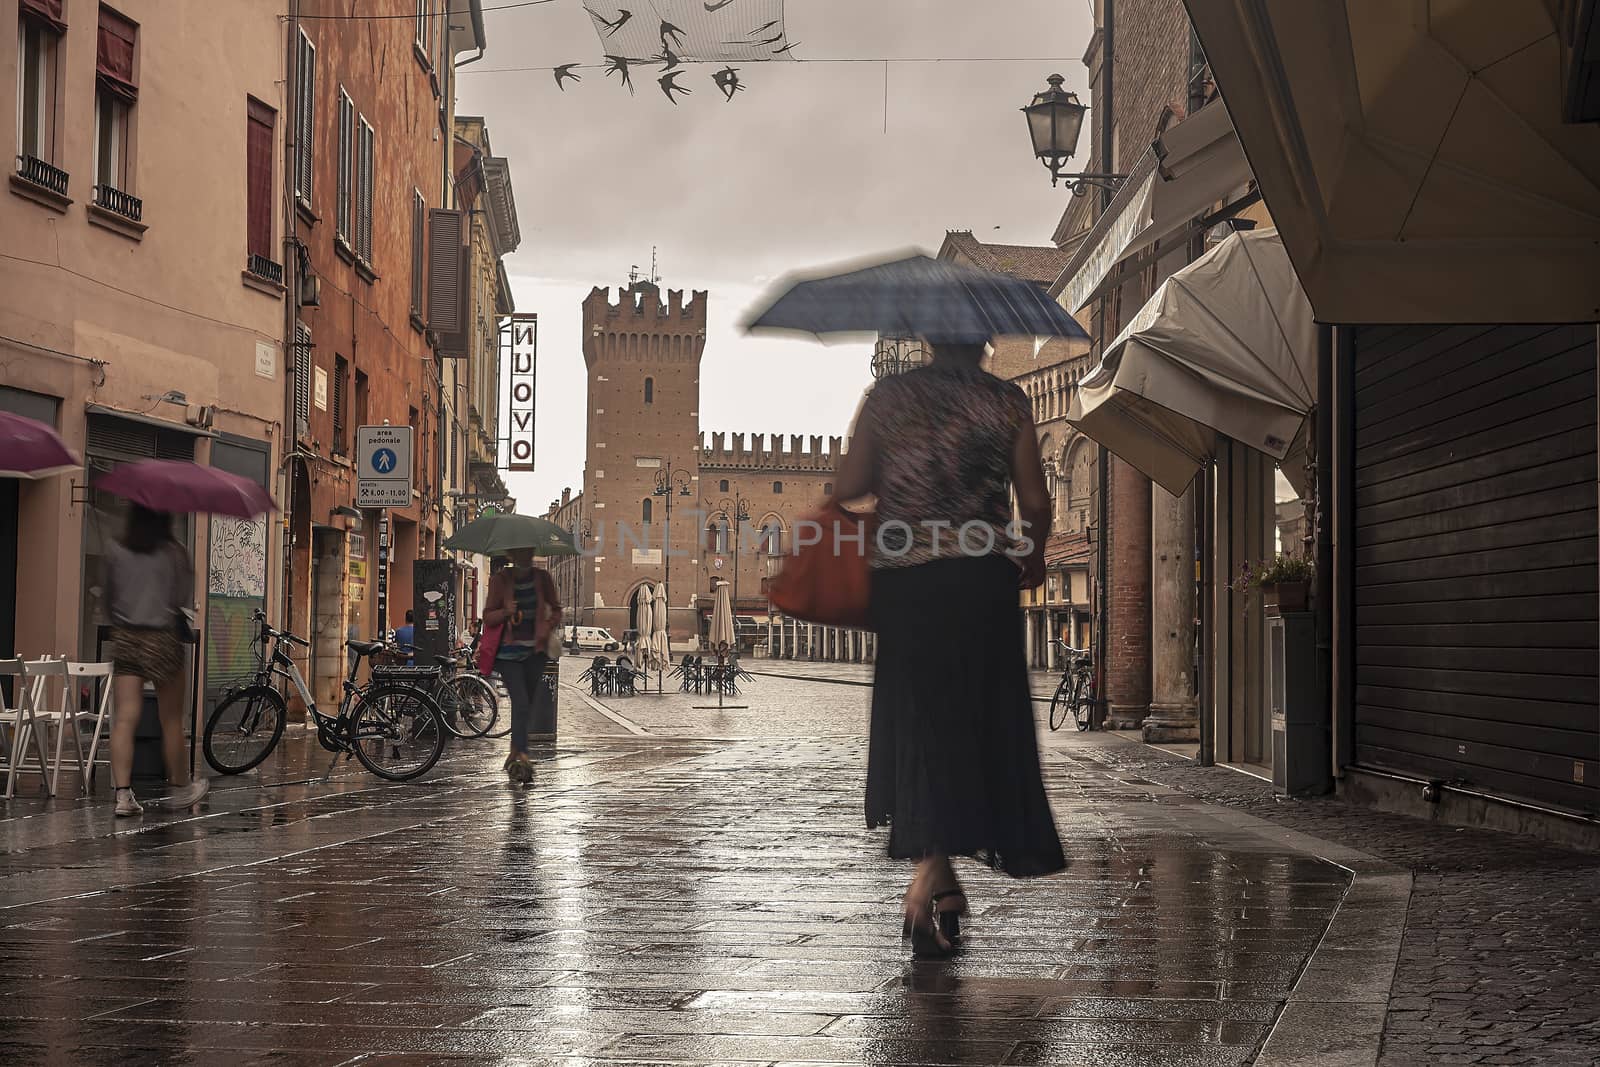 Evocative view of the street that leads to Piazza Trento Trieste in Ferrara 12 by pippocarlot